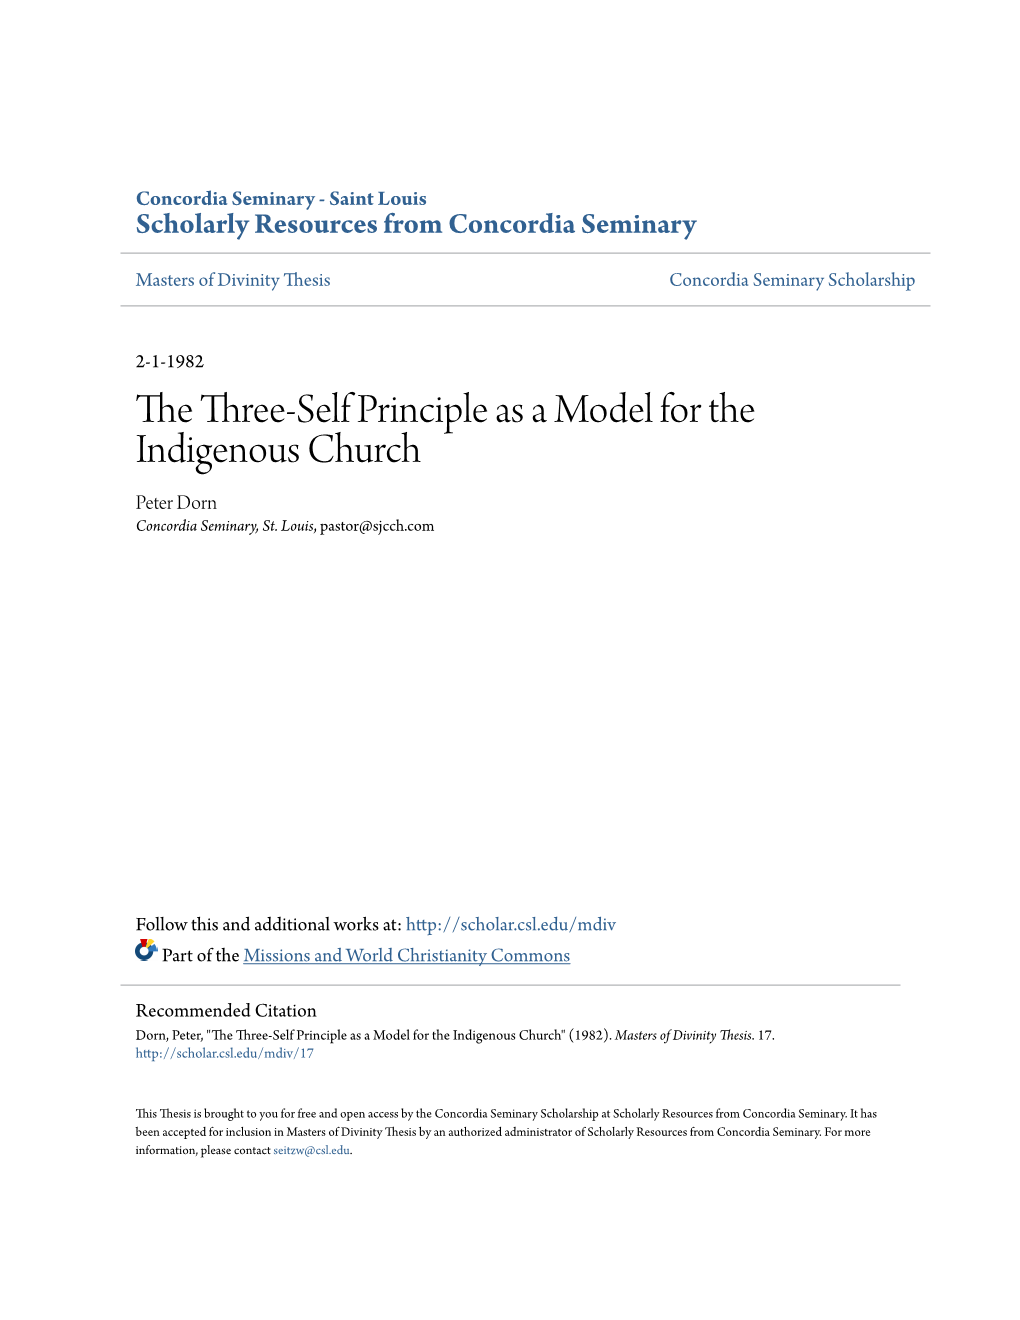 The Three-Self Principle As a Model for the Indigenous Church Peter Dorn Concordia Seminary, St